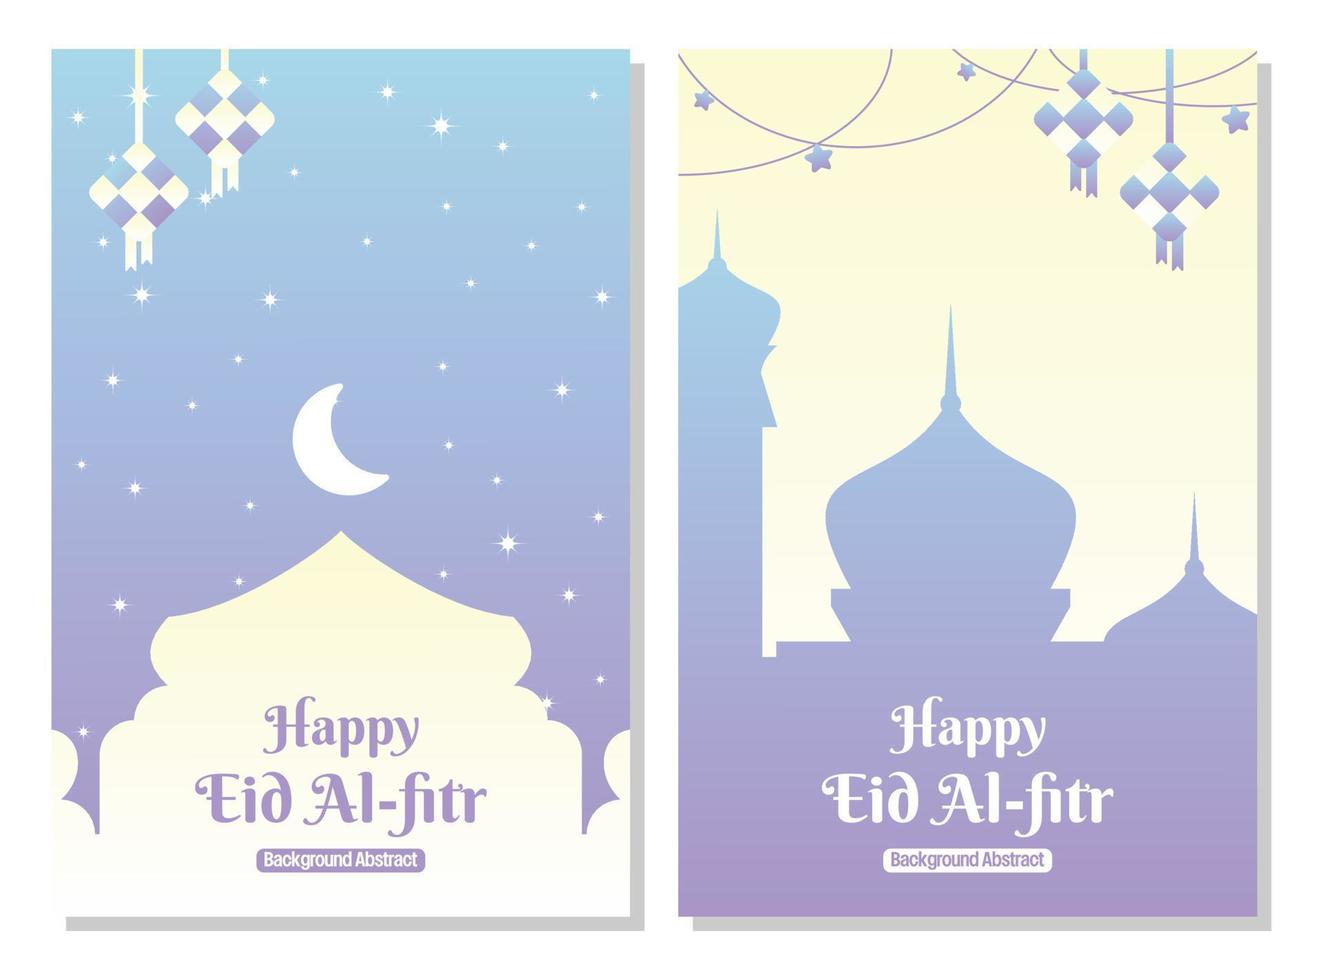 editable islamic sale poster template. with diamond ornaments, moon, stars and the silhouette of a mosque. Design for banner, social media, greeting card and web. Islamic holiday vector illustration